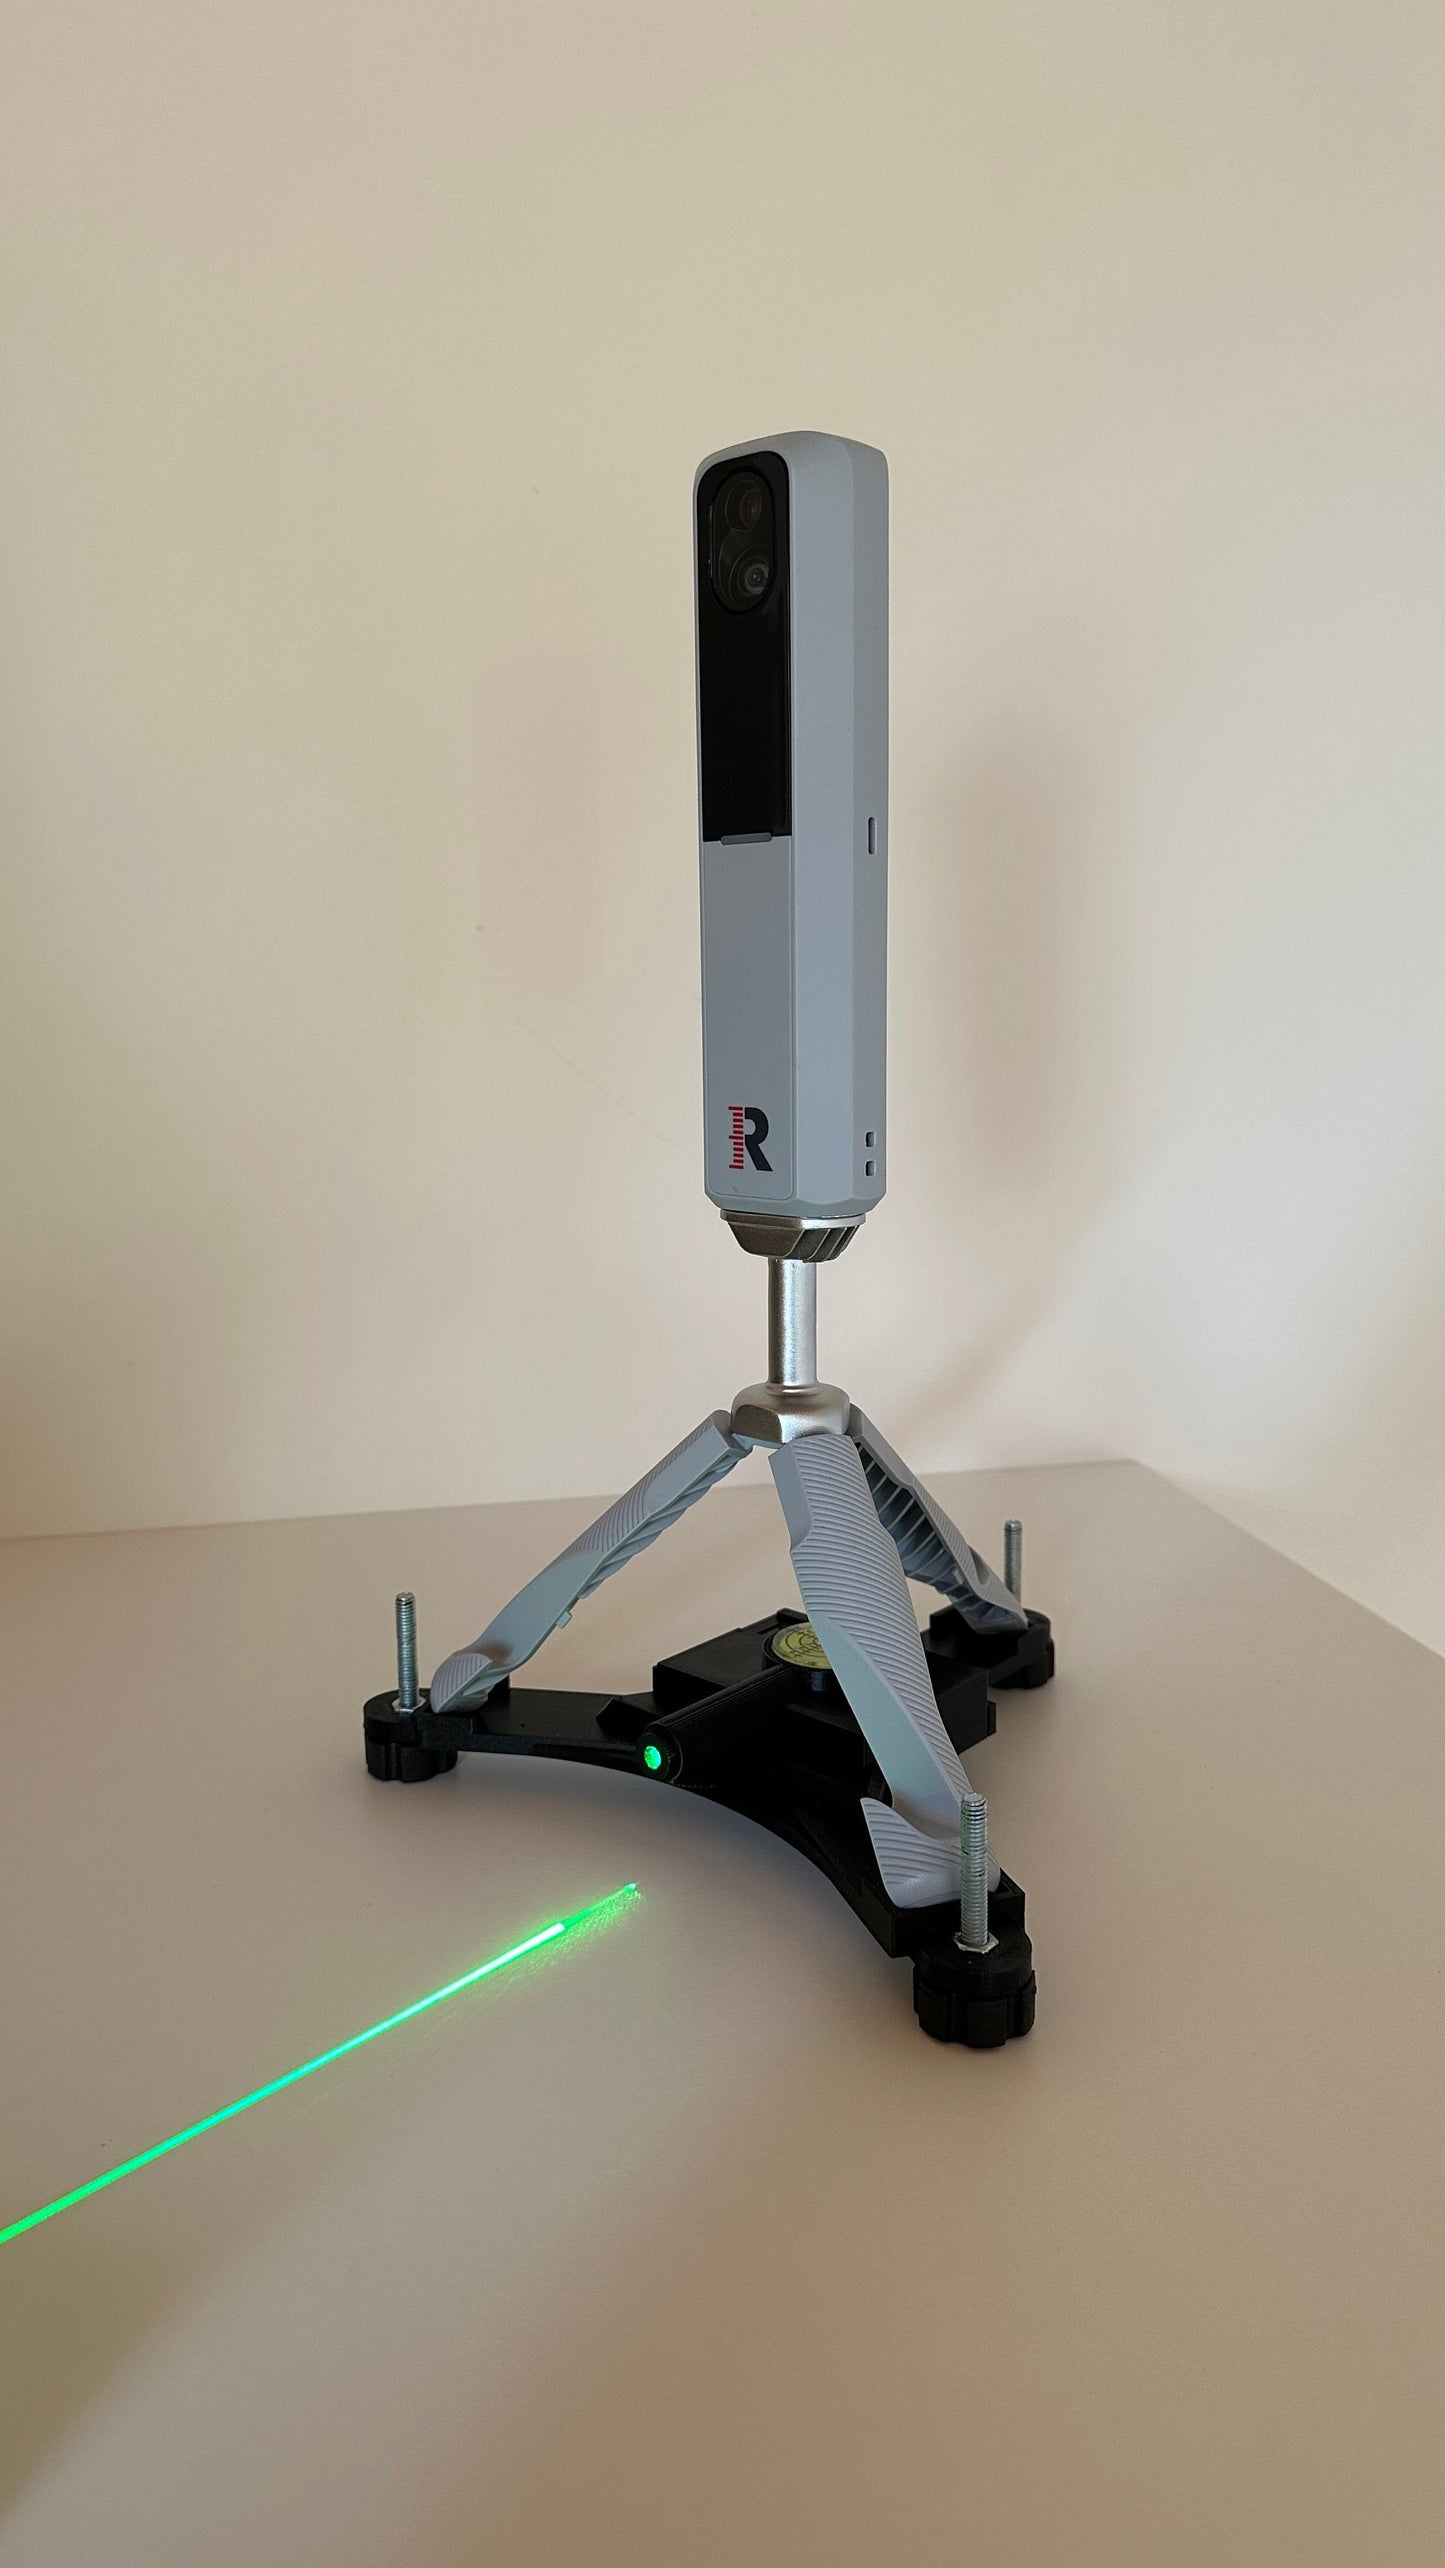 Rapsodo MLM 2 Pro alignment tool (Red or Green laser)